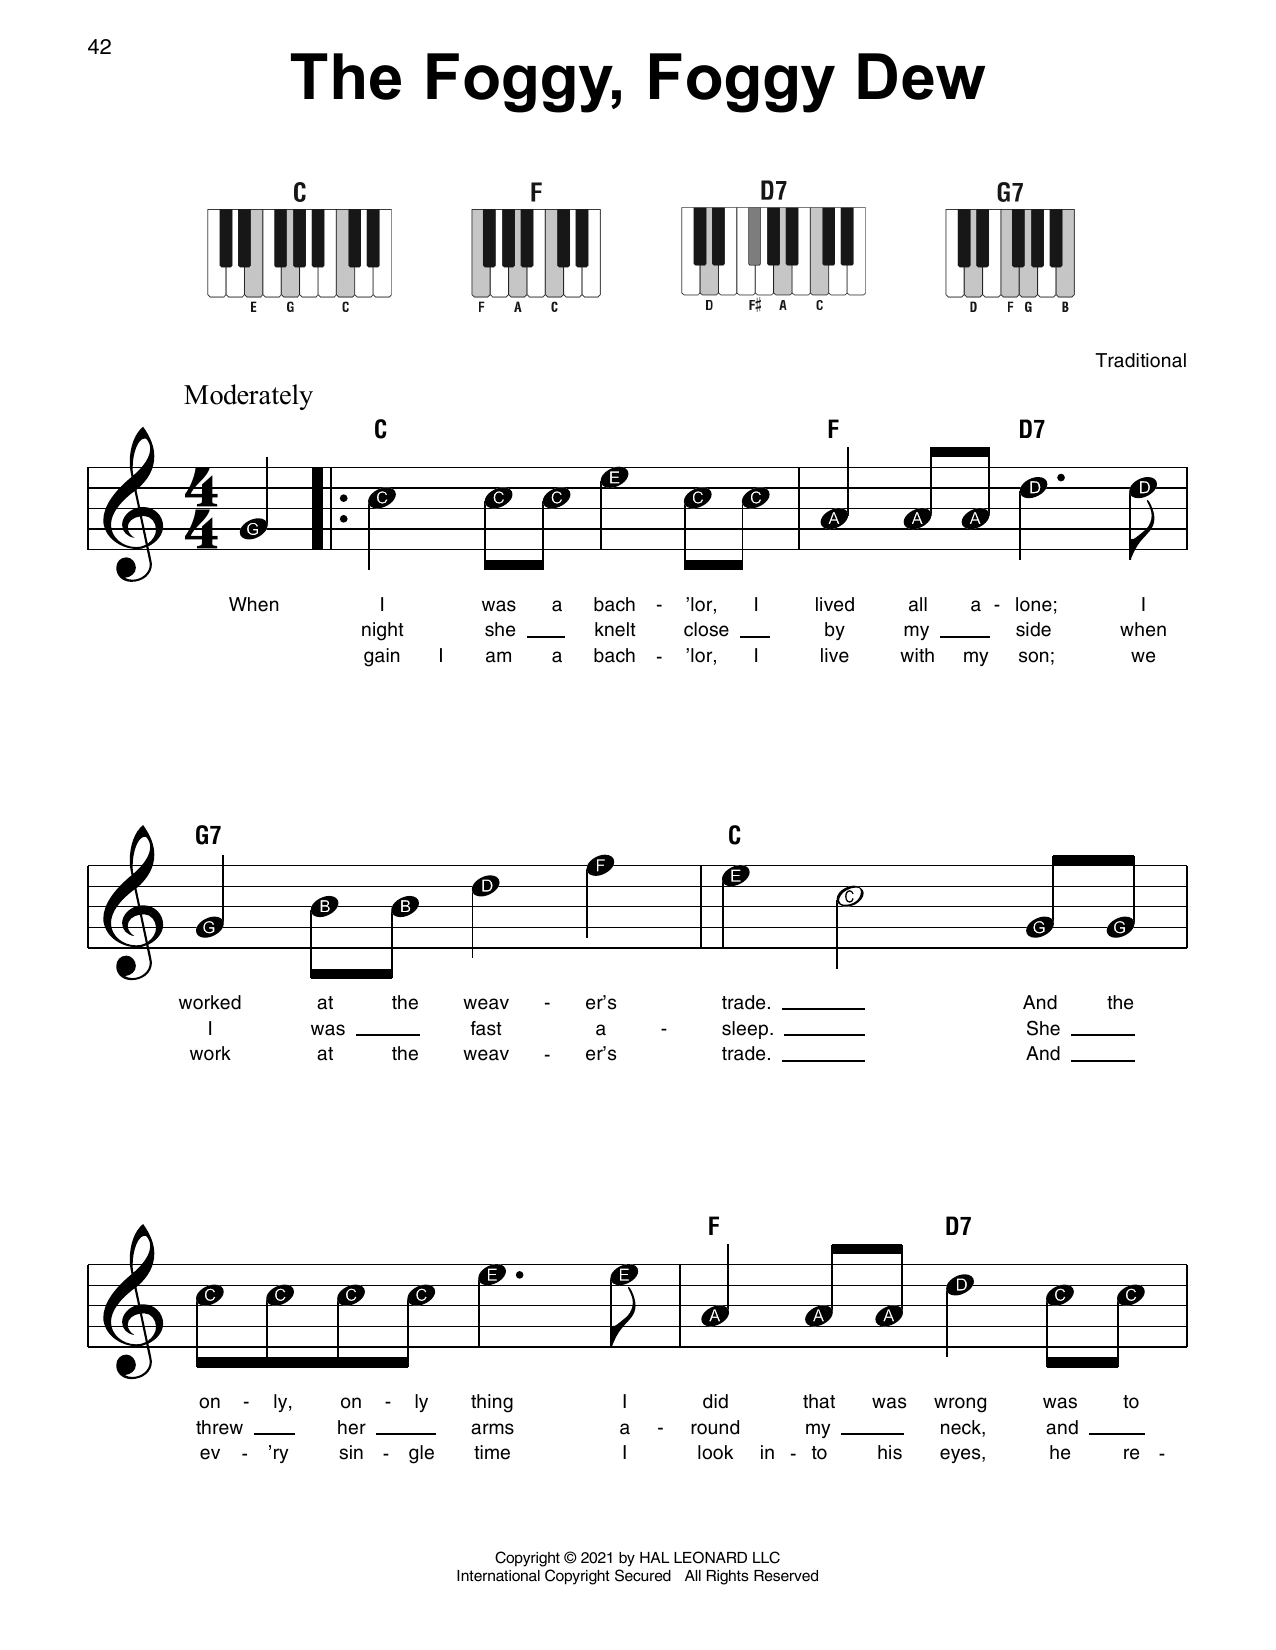 Download Traditional The Foggy, Foggy Dew Sheet Music